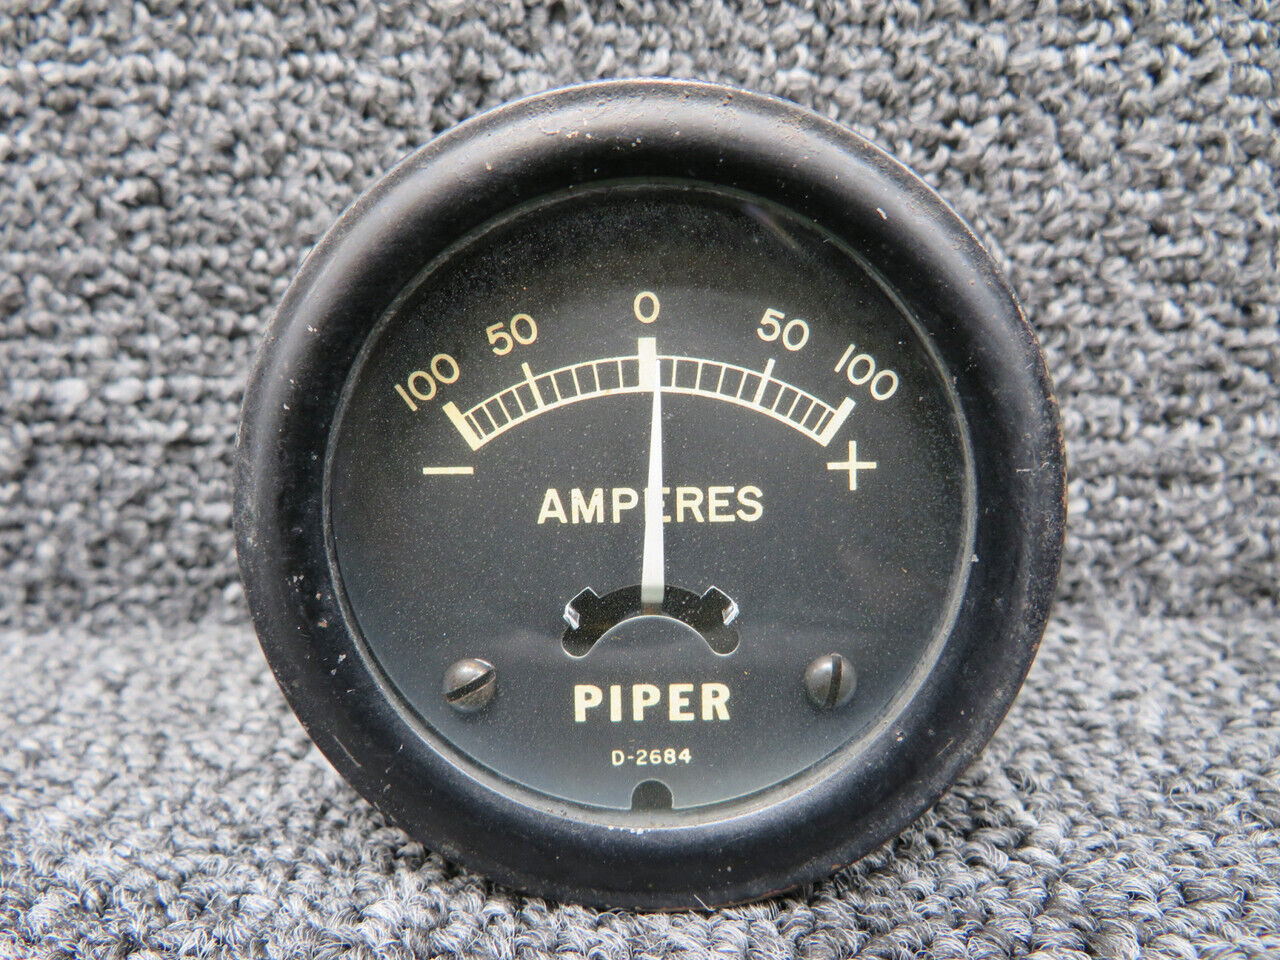 D-2684 Piper Ammeter Indicator (Range: -100 to 100 Amps) (Faded Numbers on Face)